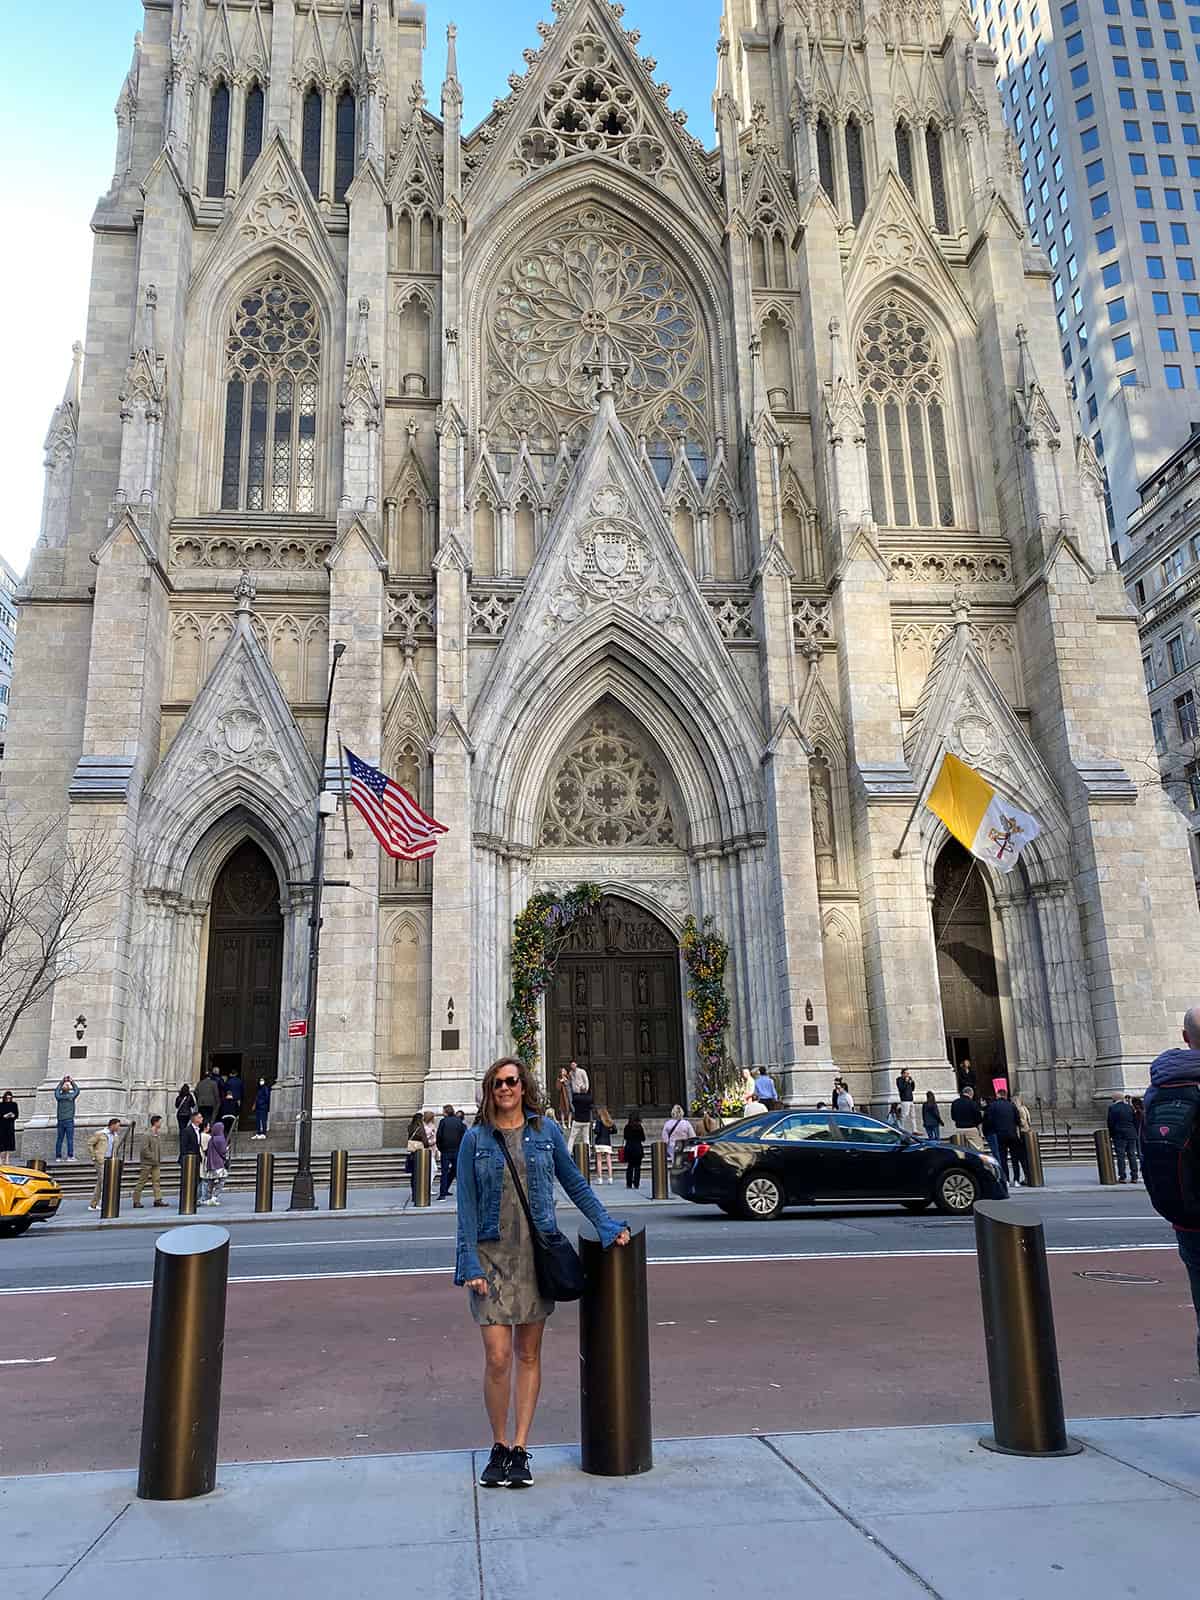 Me in front of St. Patrick's Cathedral.